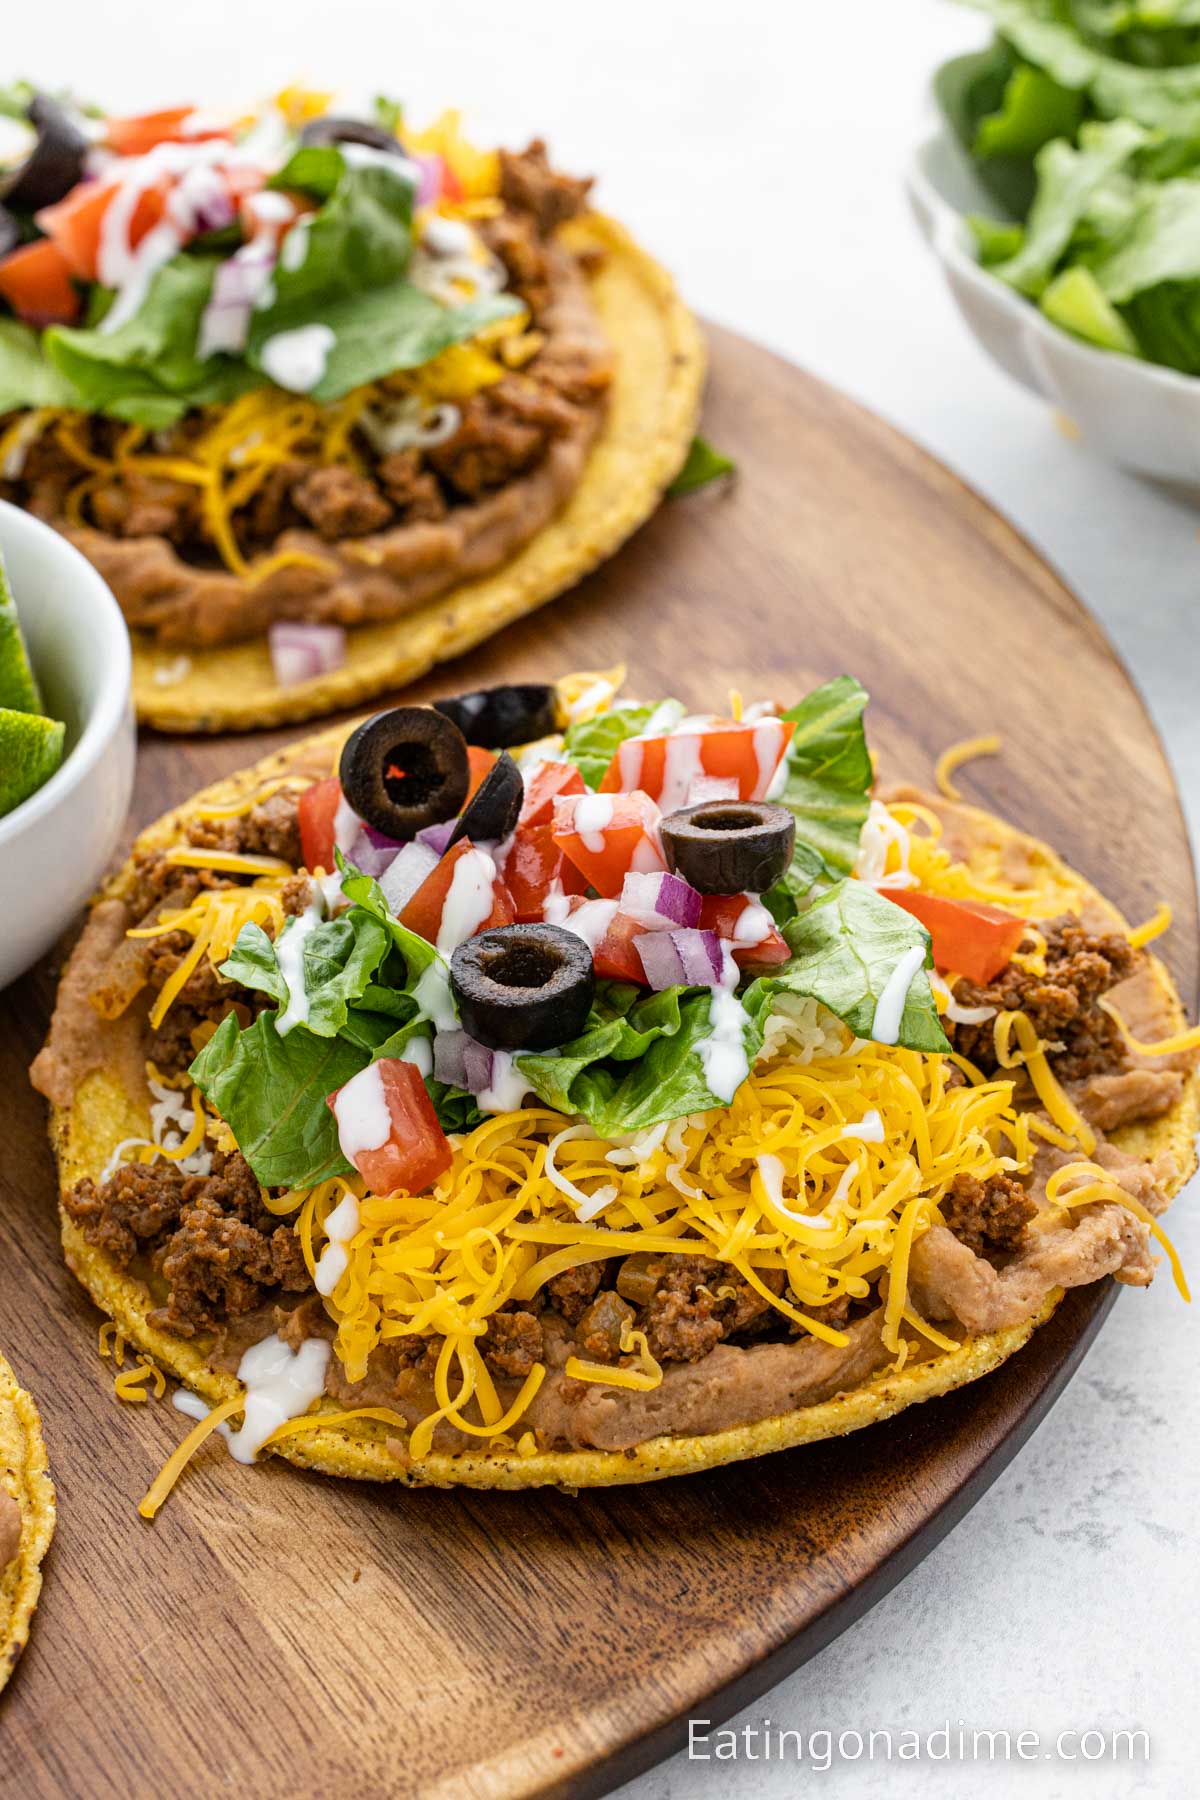 Ground Beef Tostadas topped with cheese, tomatoes, lettuce, black olives